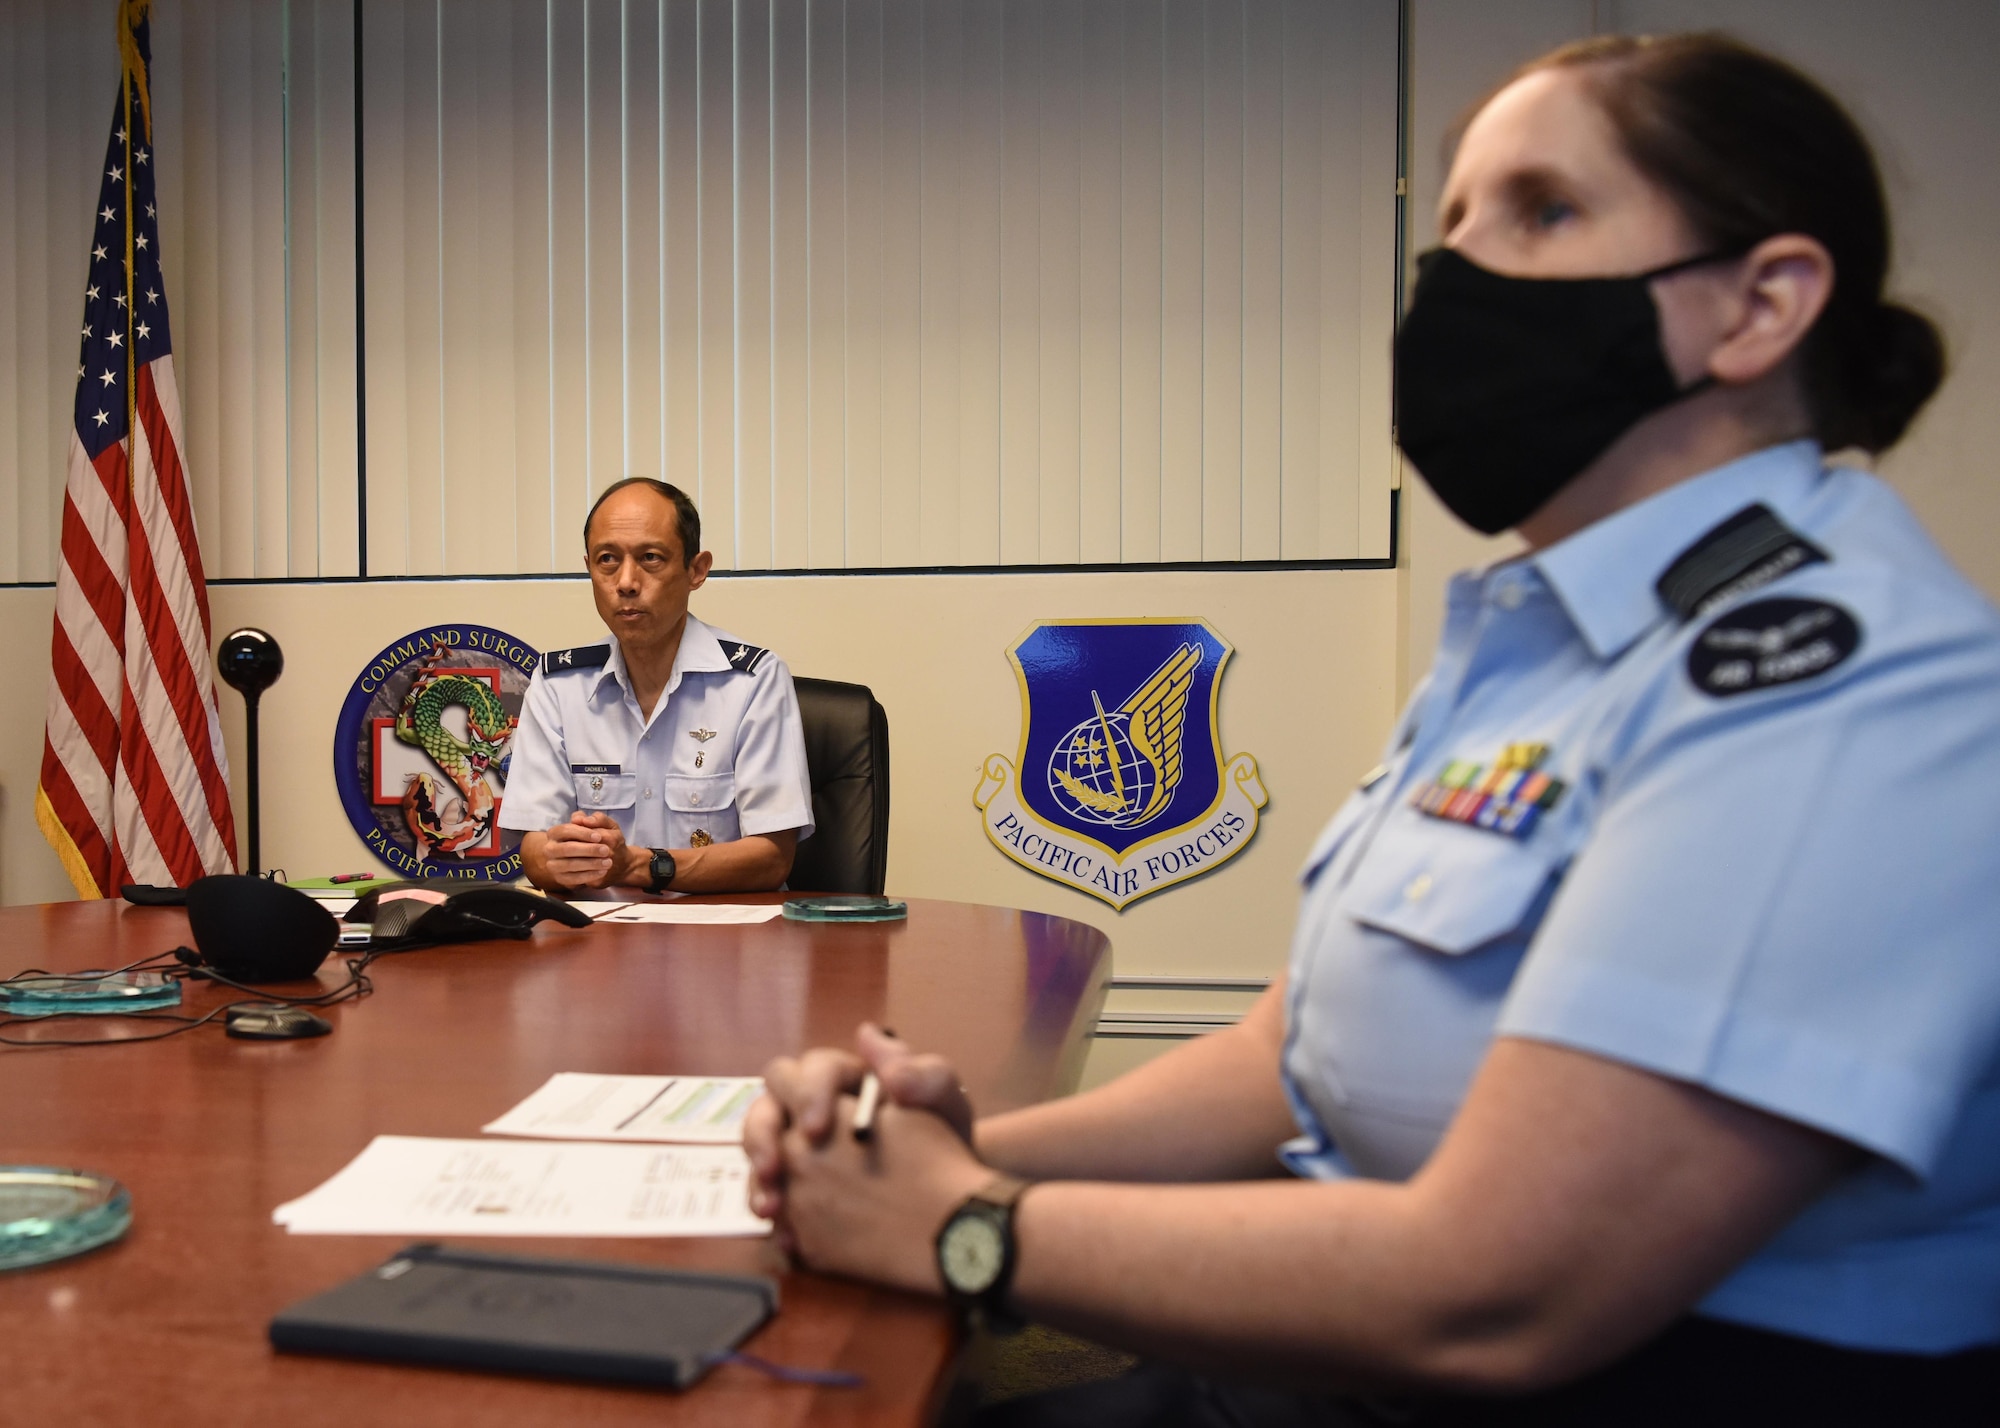 U.S. Air Force Col. Rudy Cachuela, left, Pacific Air Forces command surgeon, provides opening remarks, as Royal Australian Air Force (RAAF) WGCDR Joleen Darby, Australian Exchange Senior Flight Surgeon, PACAF/SG looks on, during an Aerospace Medicine virtual knowledge exchange with medical experts from the Royal Australian Air Force and Royal Thai Air Force, at Joint Base Pearl Harbor-Hickam, Hawaii, Nov. 23, 2020.  The exchange focused on highlighting current best practices in aviation medicine and patient movement to enhance aircrew safety and patient care.  (U.S. Air Force photo by Tech. Sgt. Zach Vaughn)